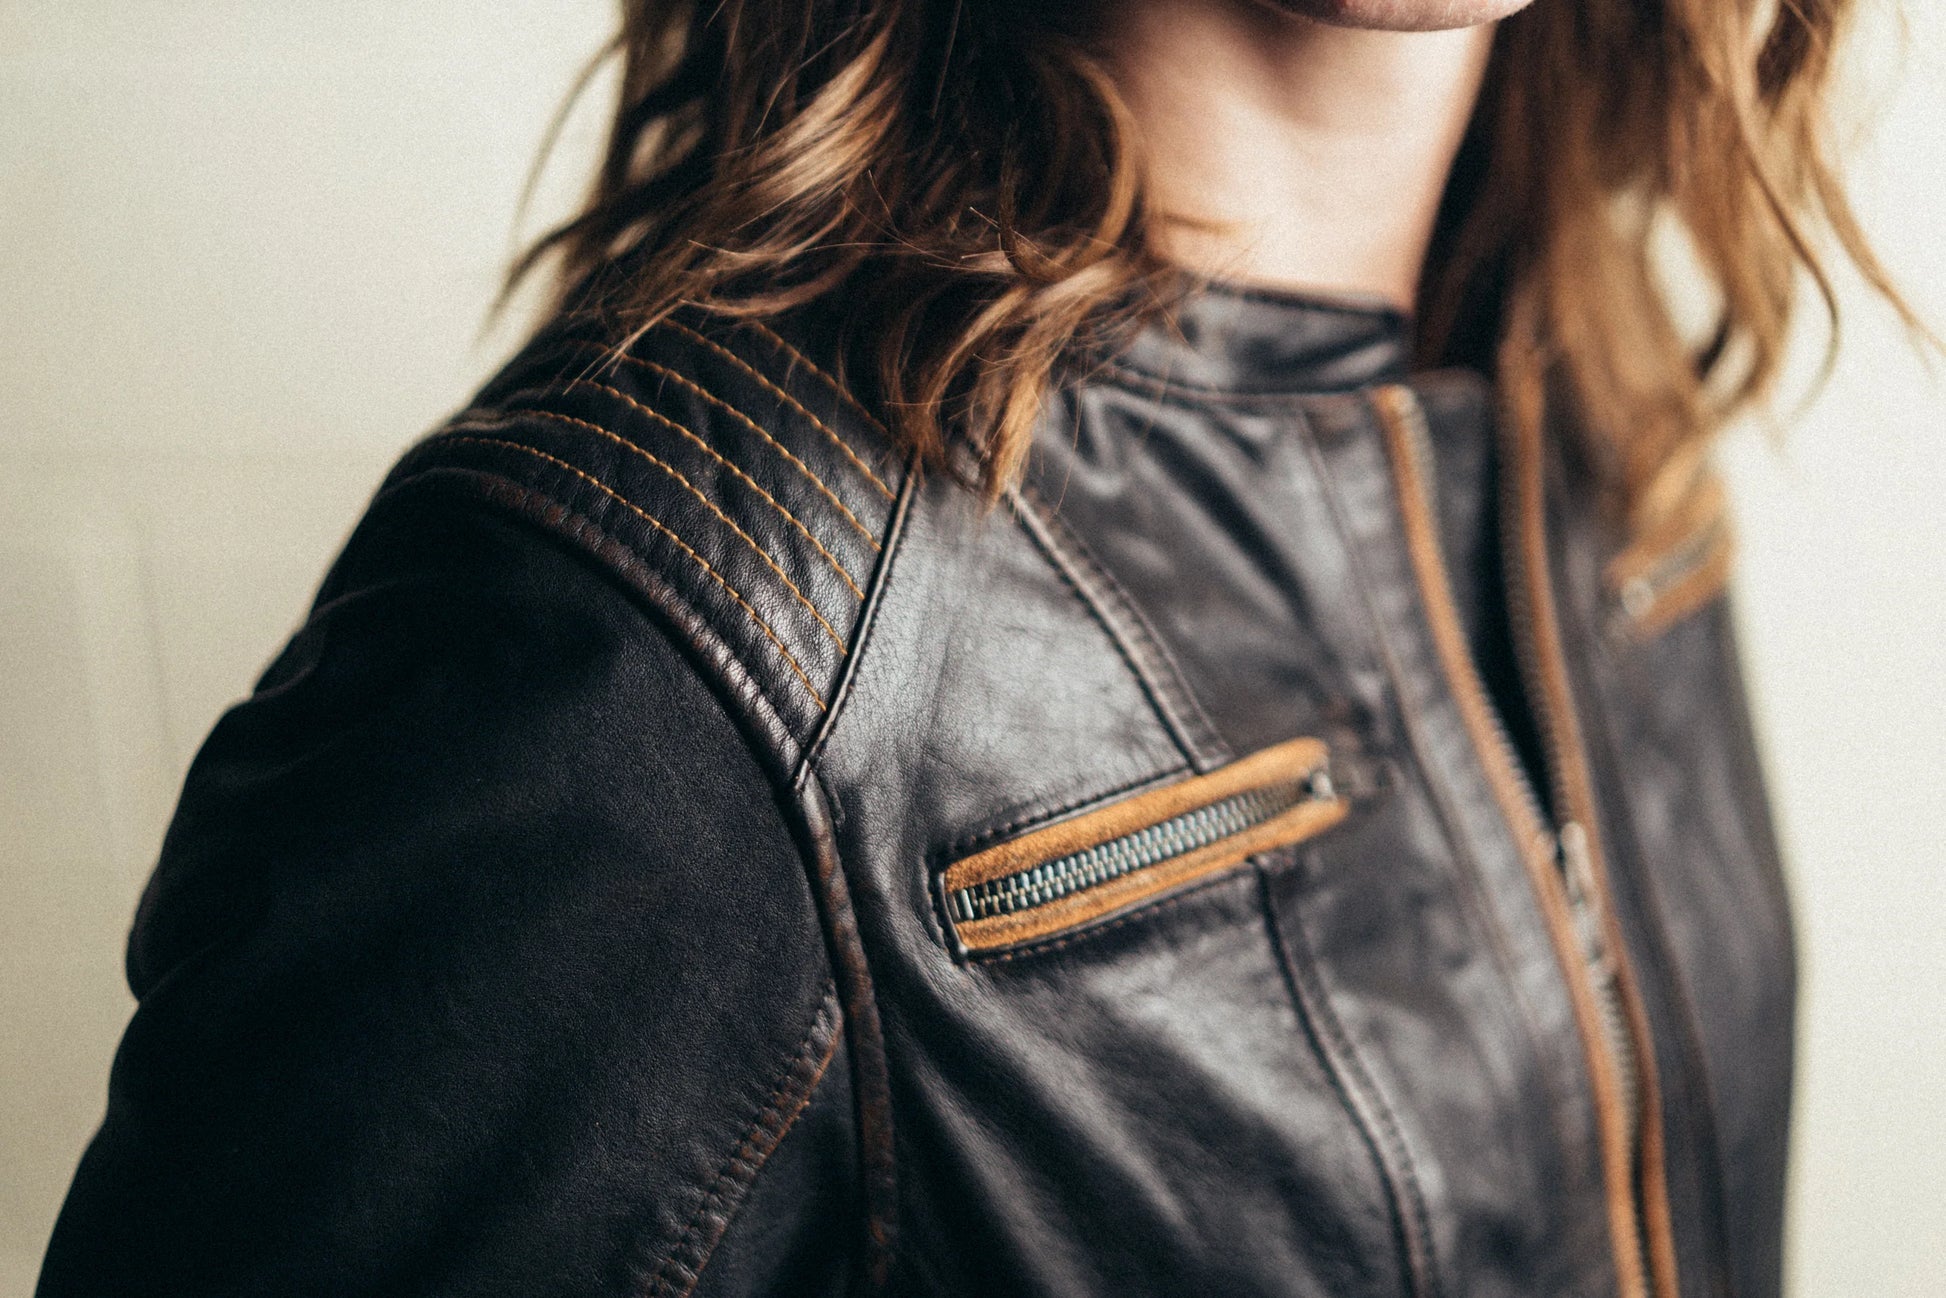 Top view of woman wearing Electra Leather Motorcycle Jacket, emphasizing shoulder design and collar detail.